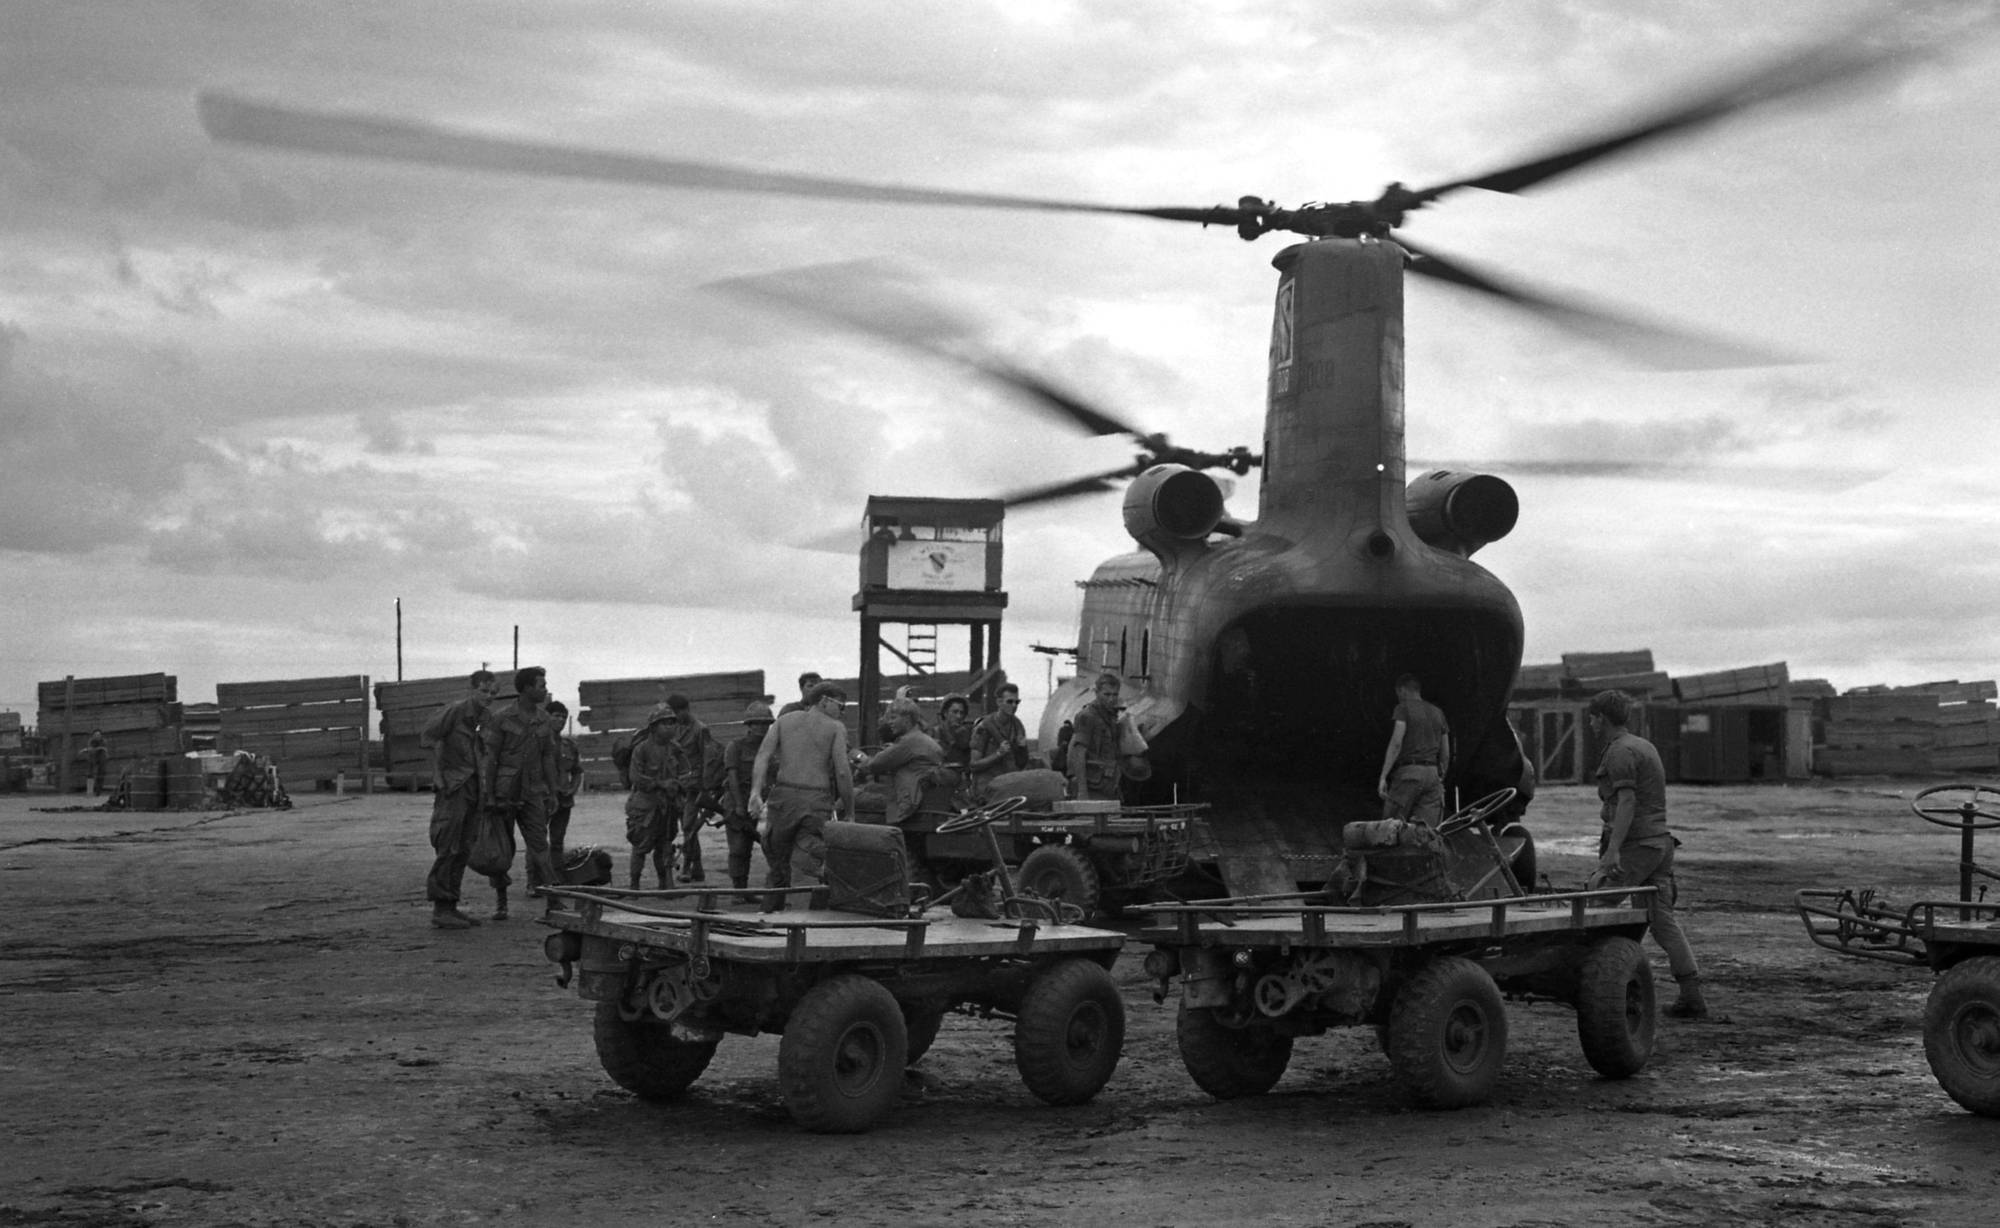 Soldiers loading a helicopter in Vietnam.